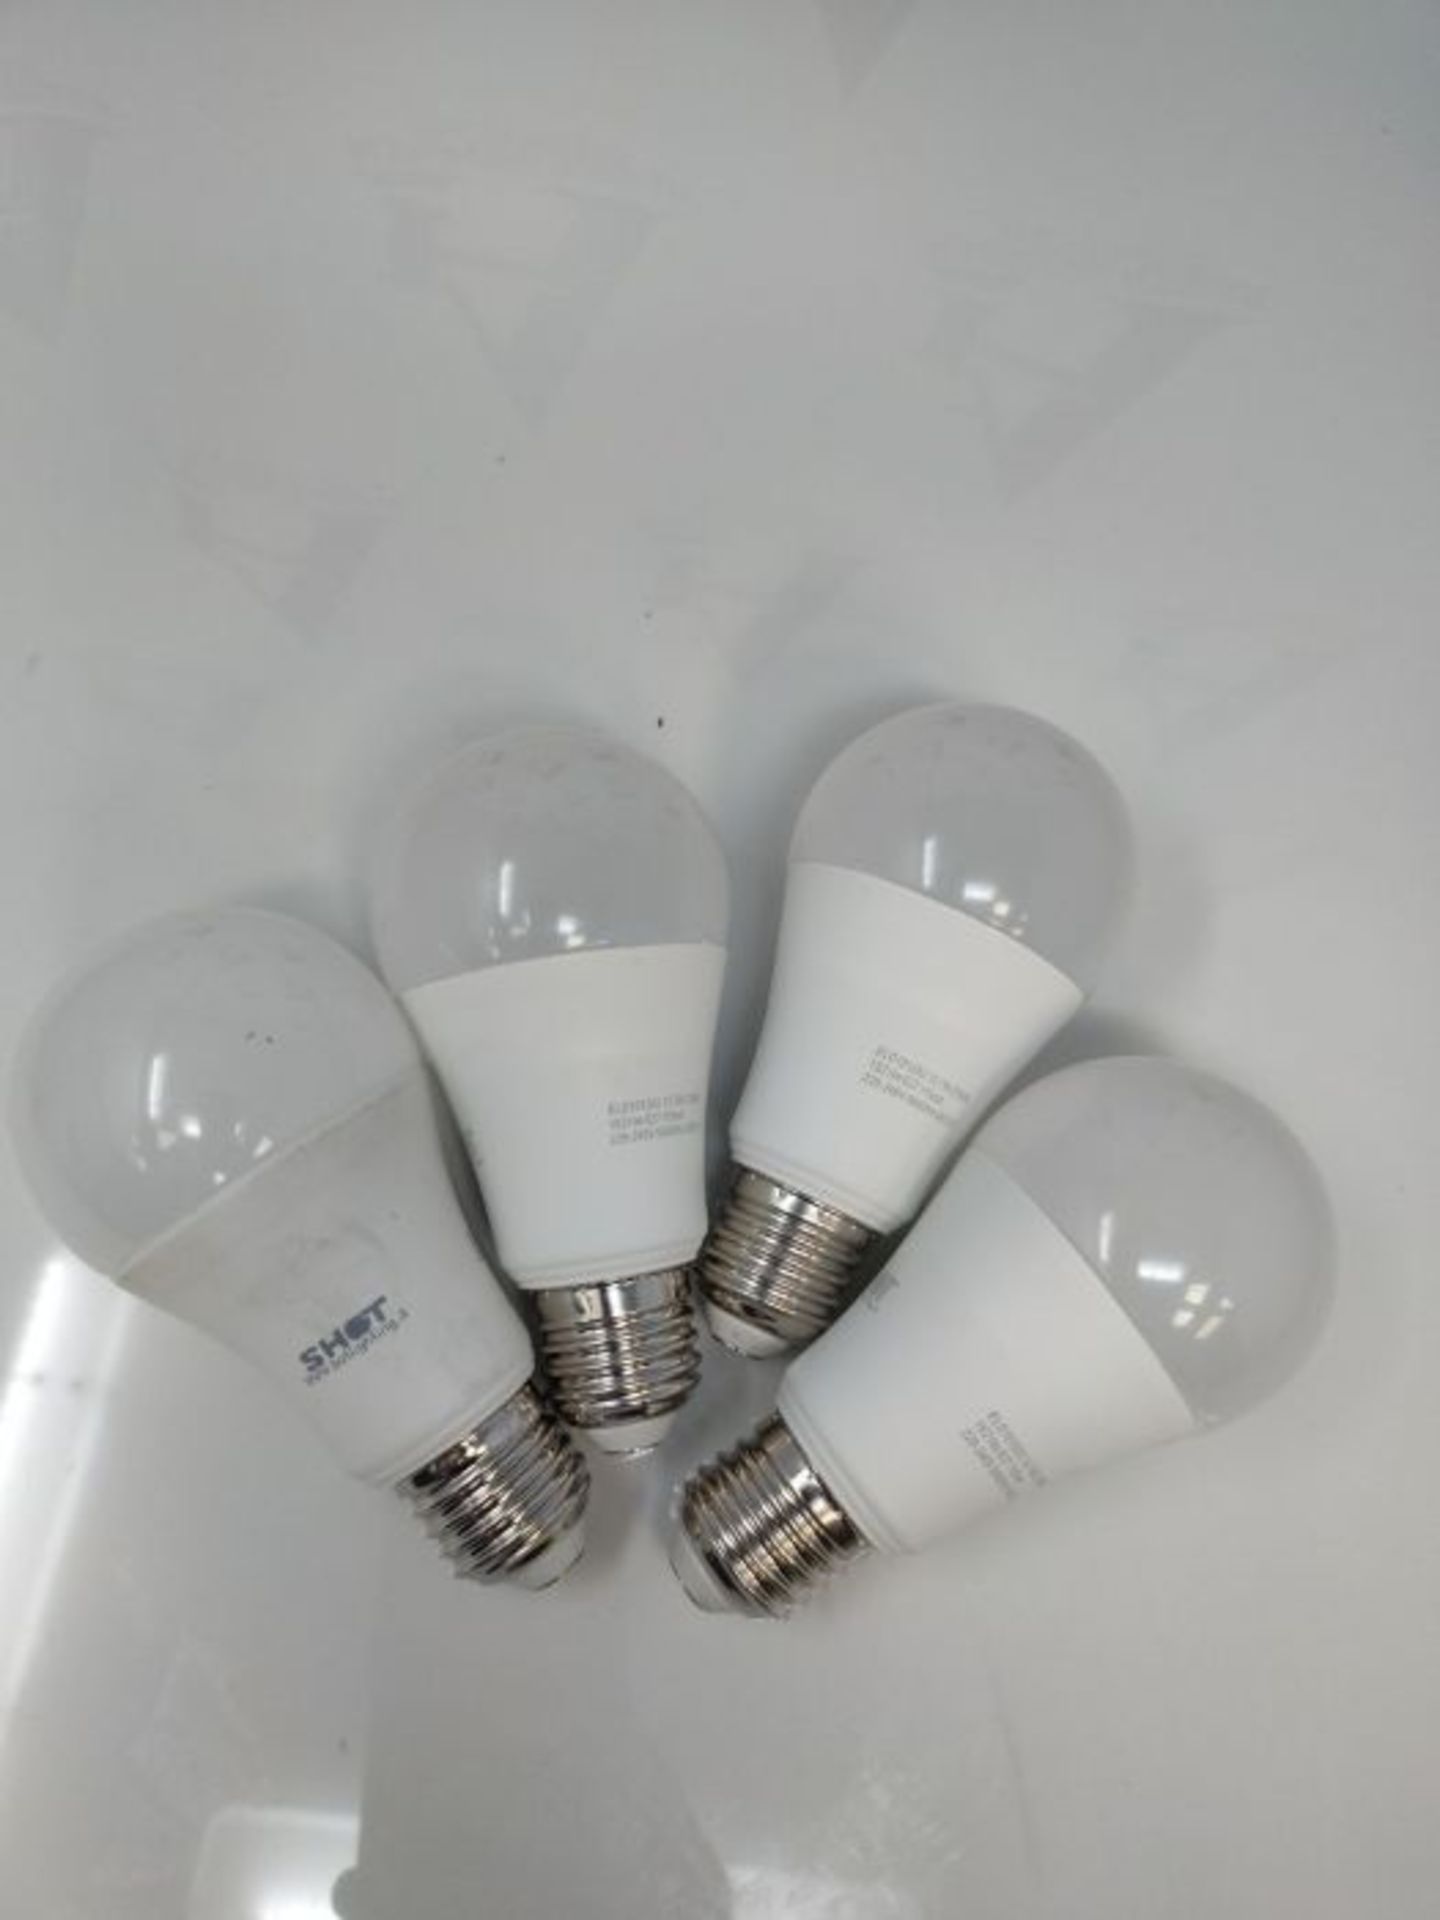 Philips LED A60 6 Pack Frosted Light Bulbs [E27 Edison Screw] 13W - 100 W Equivalent, - Image 3 of 3